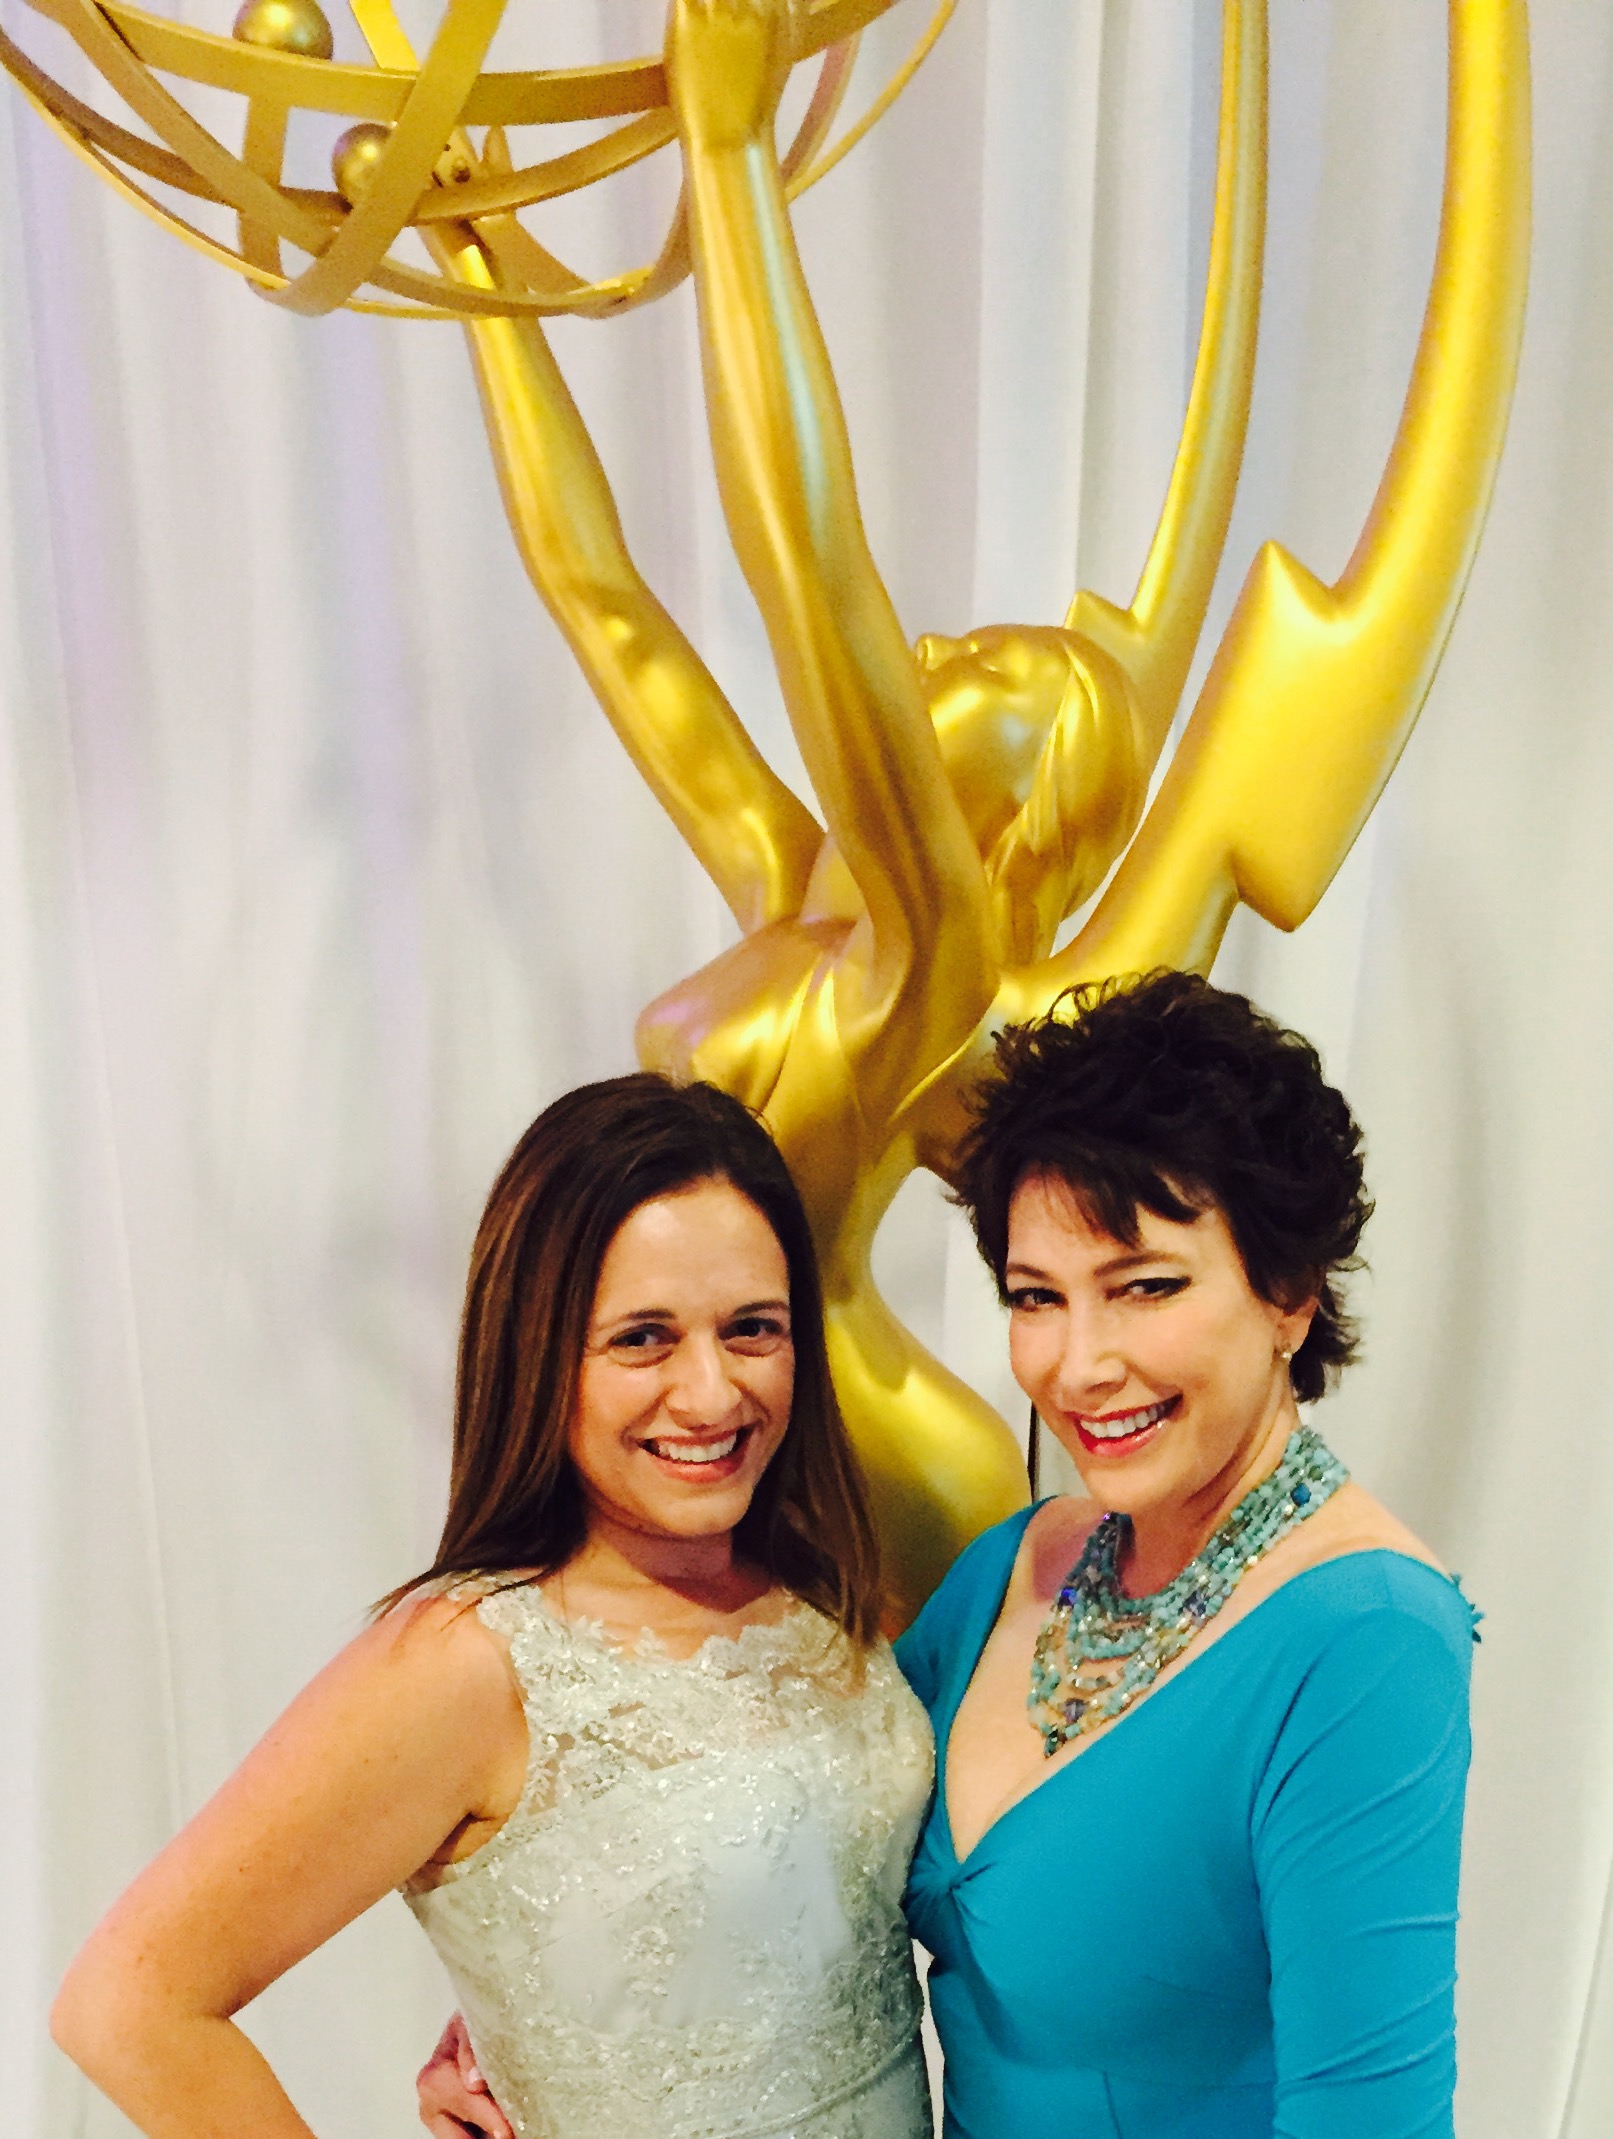 Diane Robin and Sharon Leiblein at the Emmys